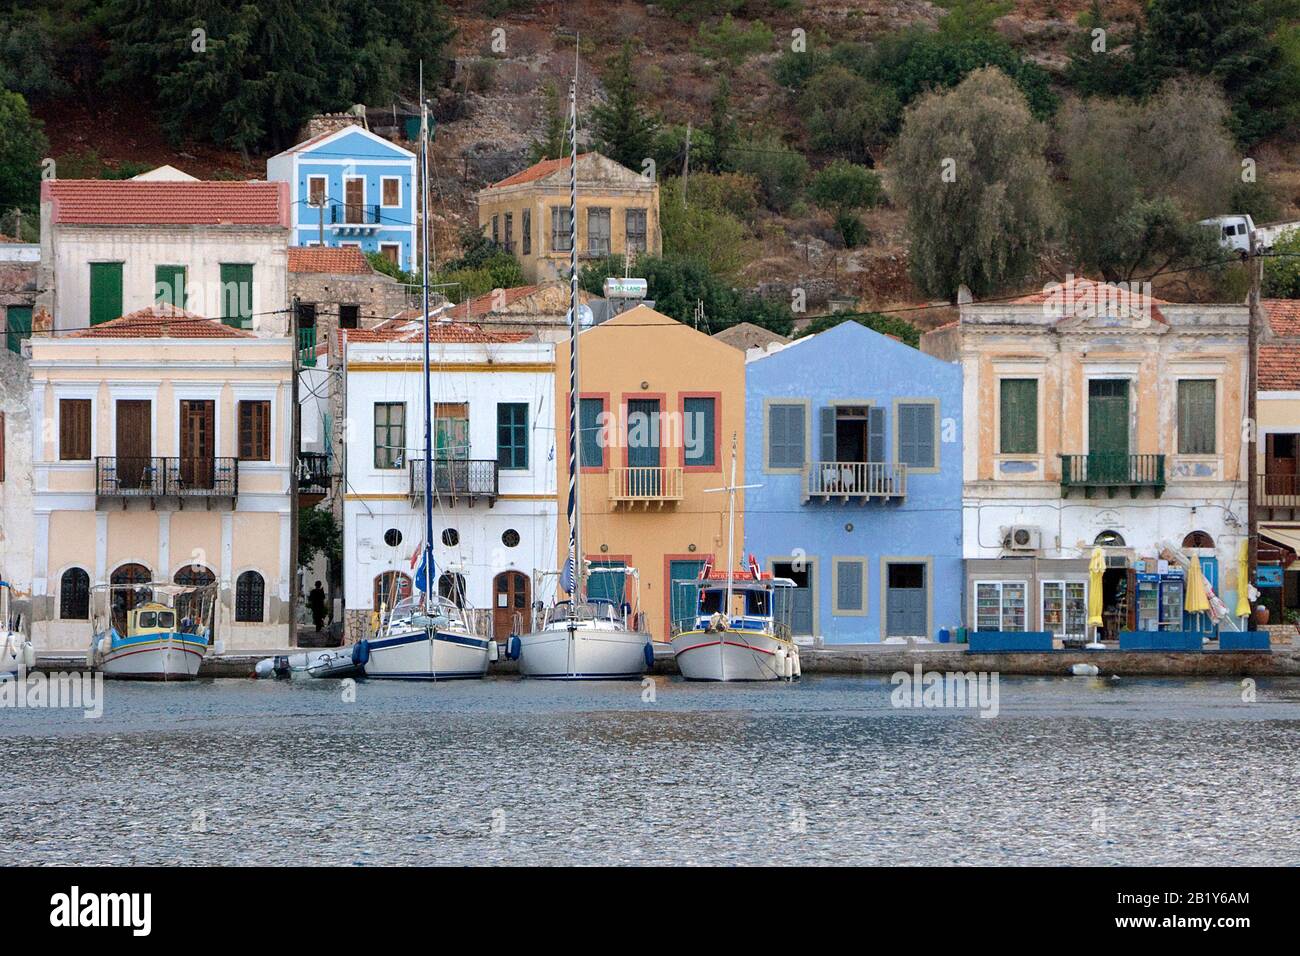 Evening mood at Meis island, also known as Kastellorizo, boats in the harbour, Meis island, Greece Stock Photo